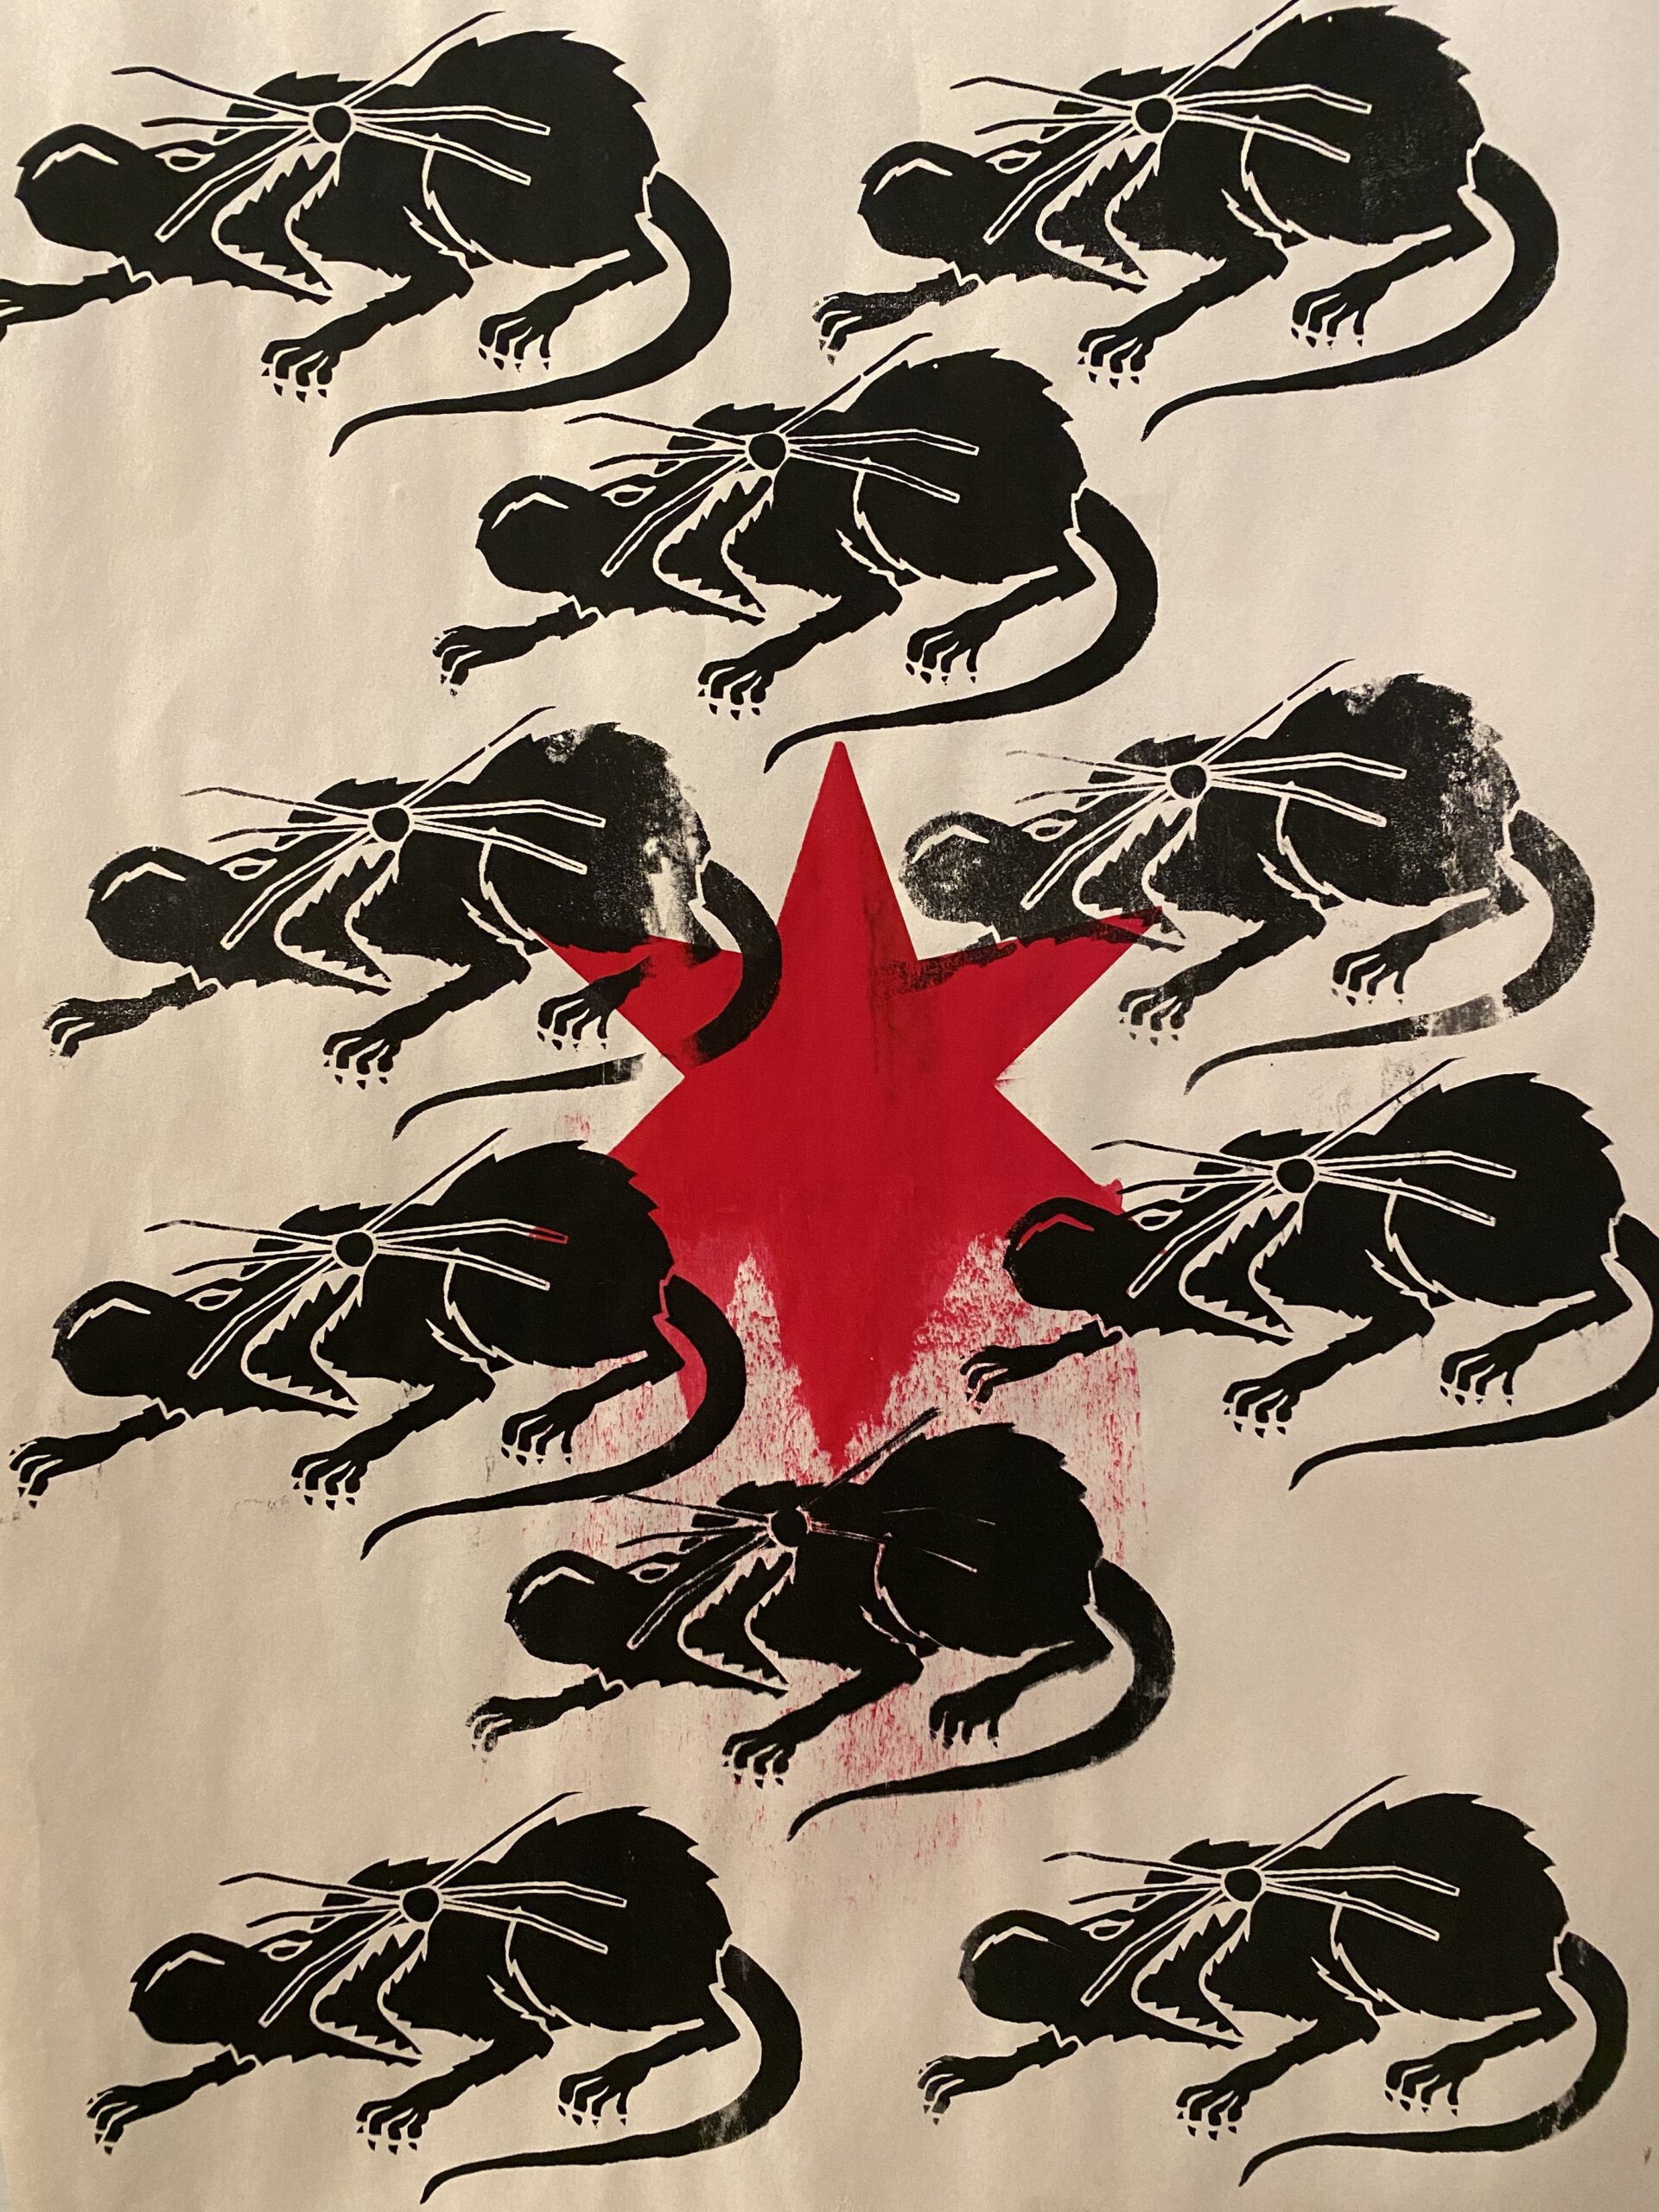 Ten cornered rats printed in black make up the background of this print where a red star dissolves in the center